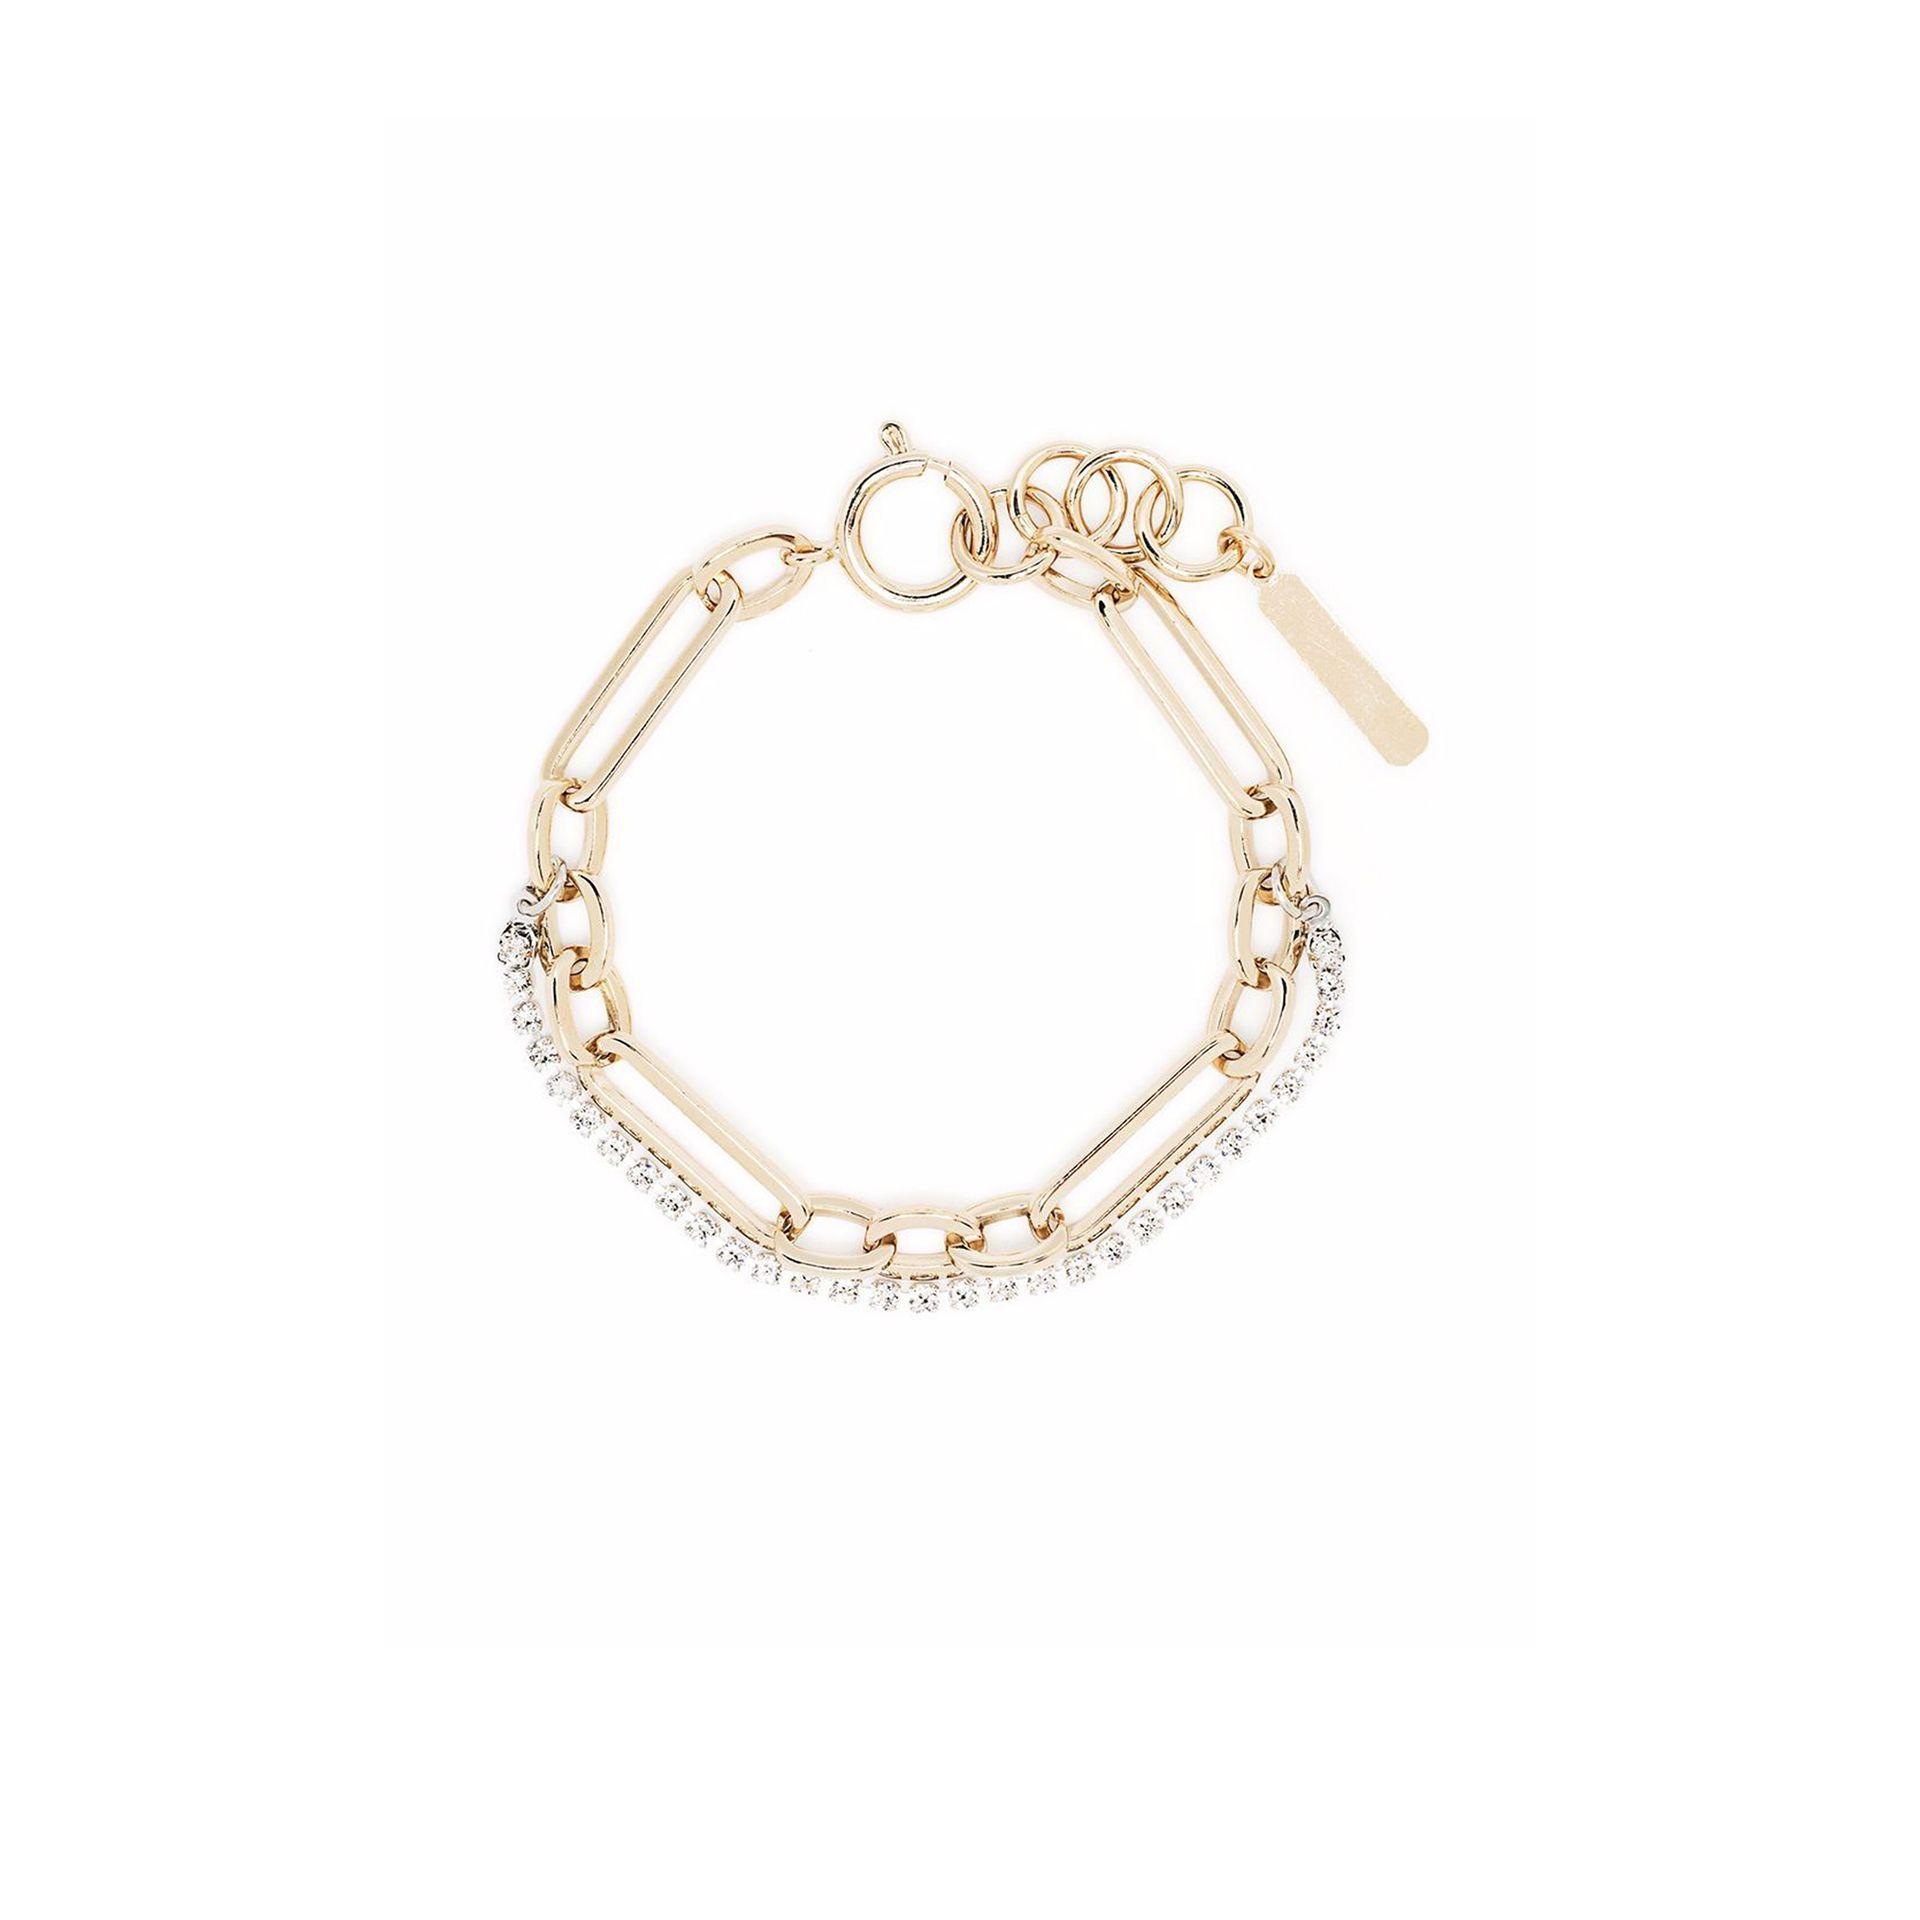 Justine Clenquet 24k Yellow Gold Plate Paloma Chain Link Crystal